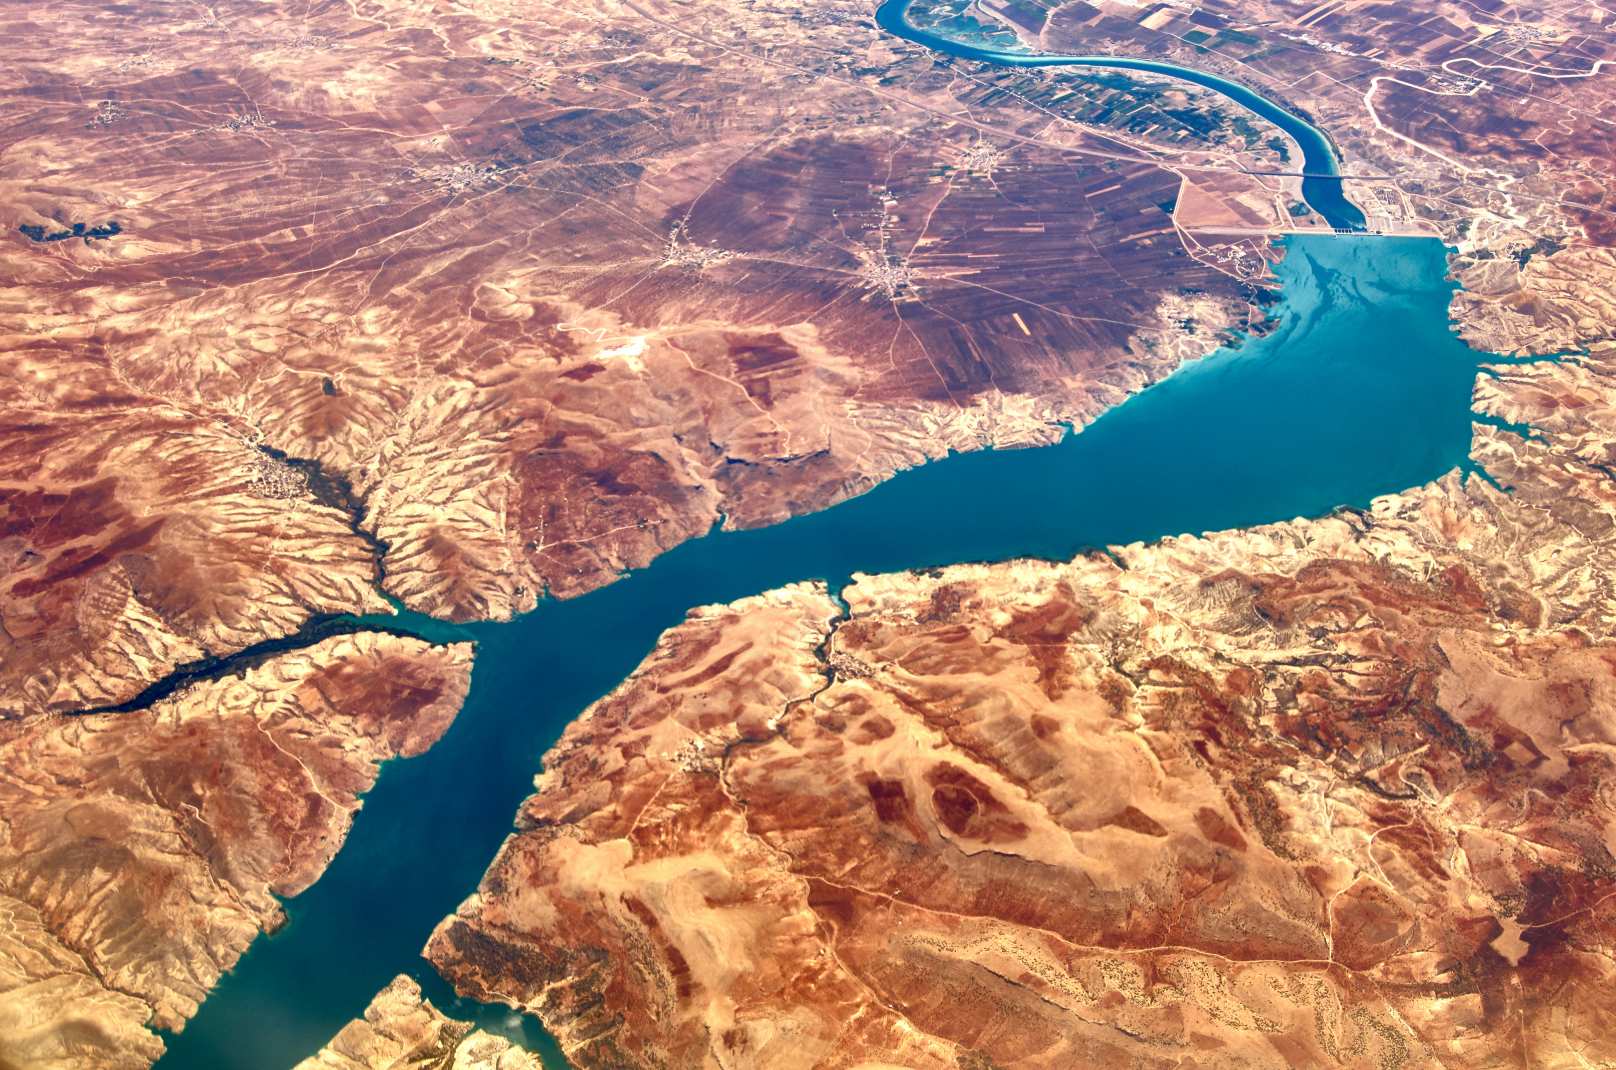 The Euphrates River dried up to reveal the secrets of antiquity and inevitable disaster 4